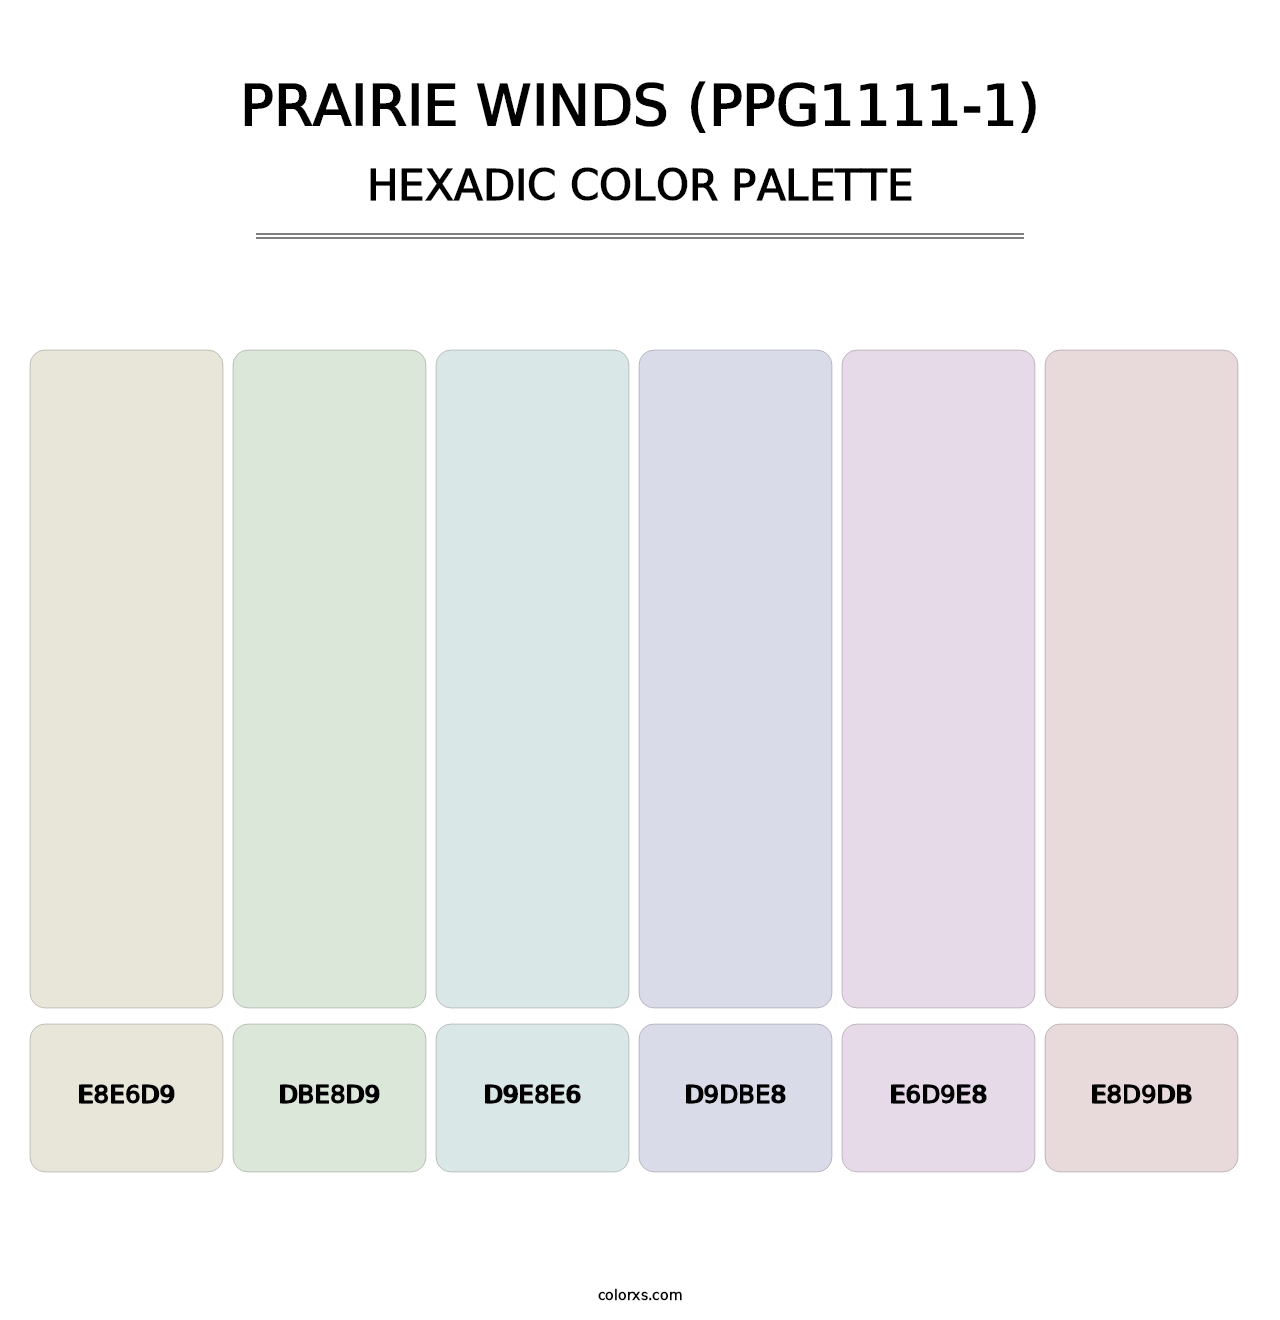 Prairie Winds (PPG1111-1) - Hexadic Color Palette